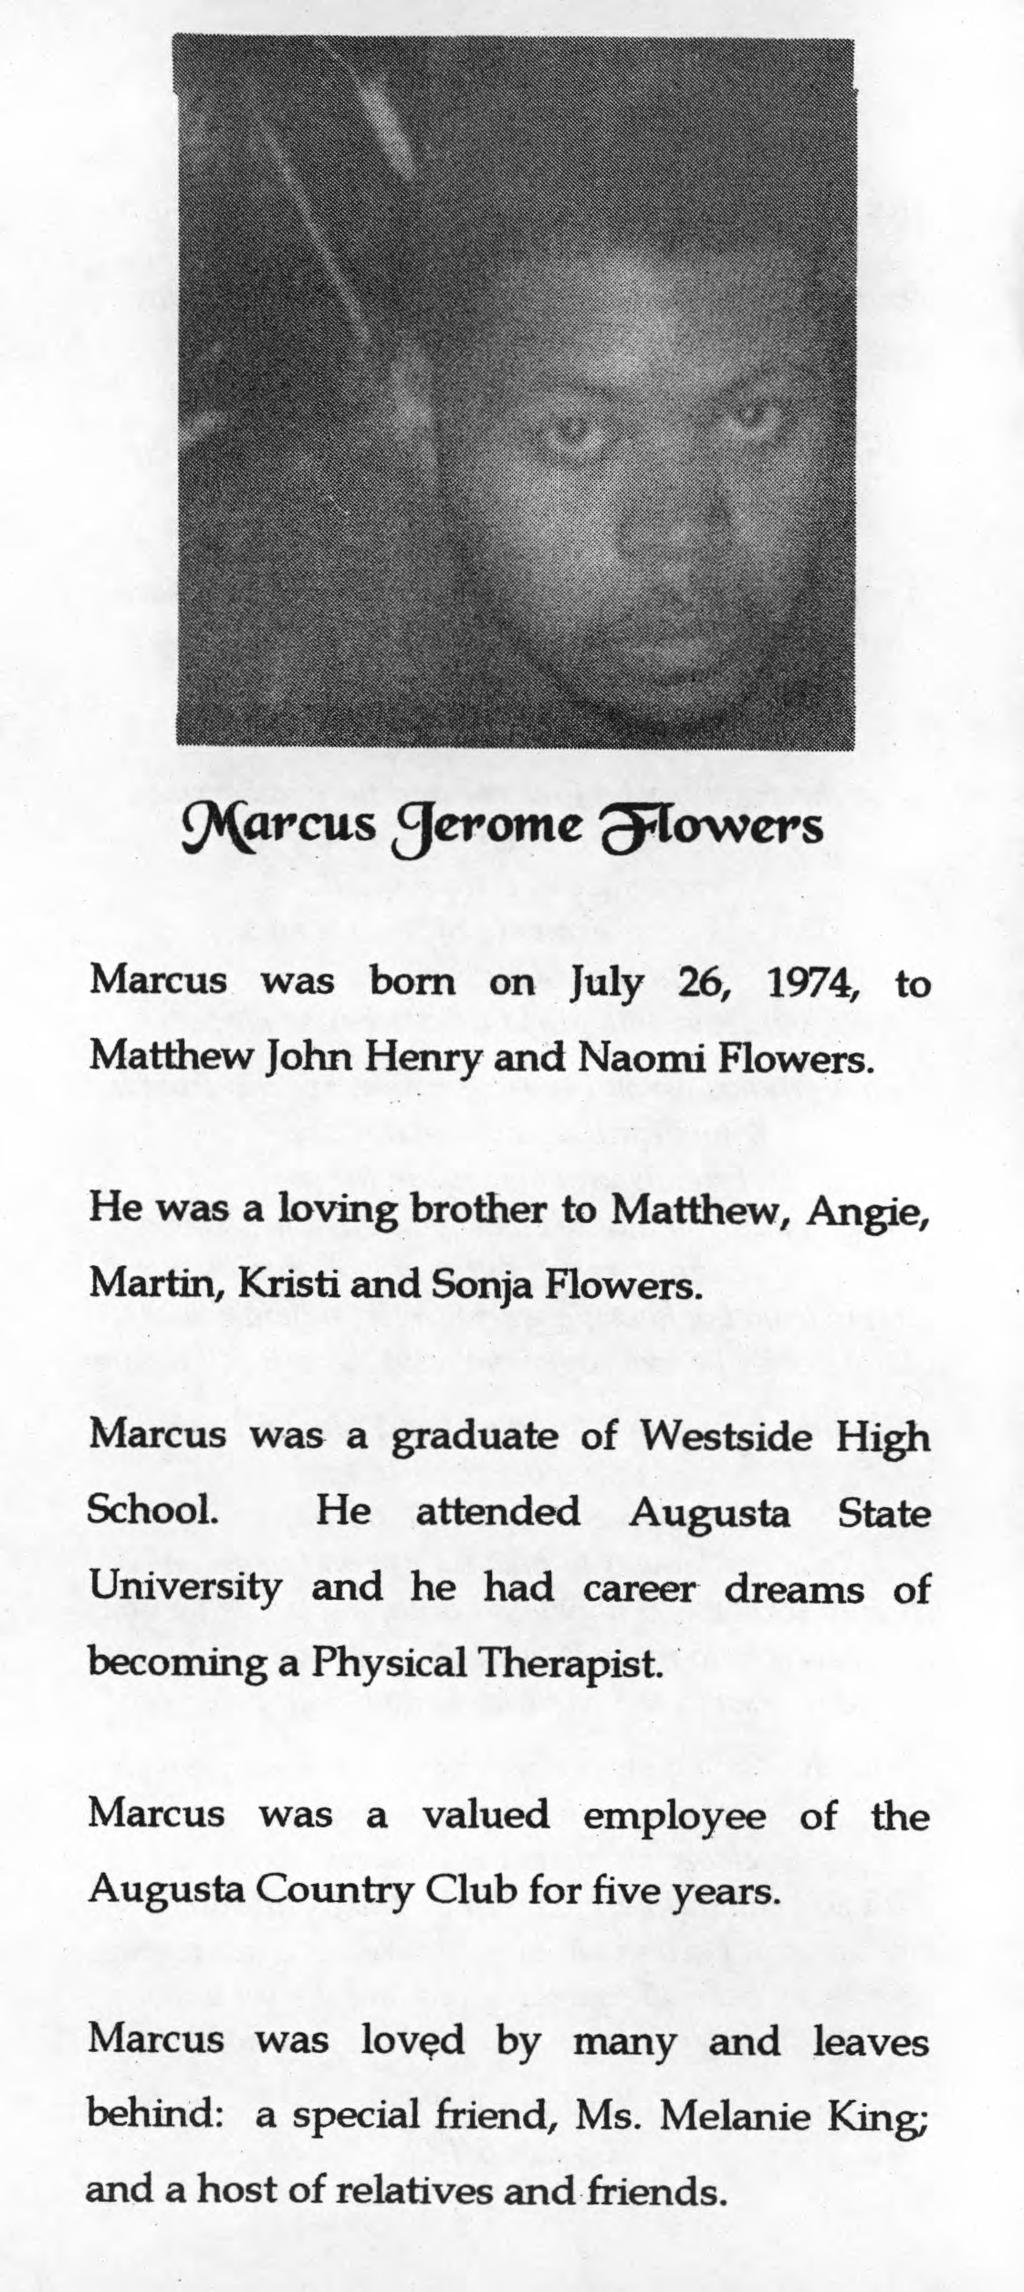 ffiprcus {Jerome powers Marcus was born on July 26, 1974, to Matthew John Henry and Naomi Flowers. He was a loving brother to Matthew, Angle, Martin, Kristi and Sonja Flowers.